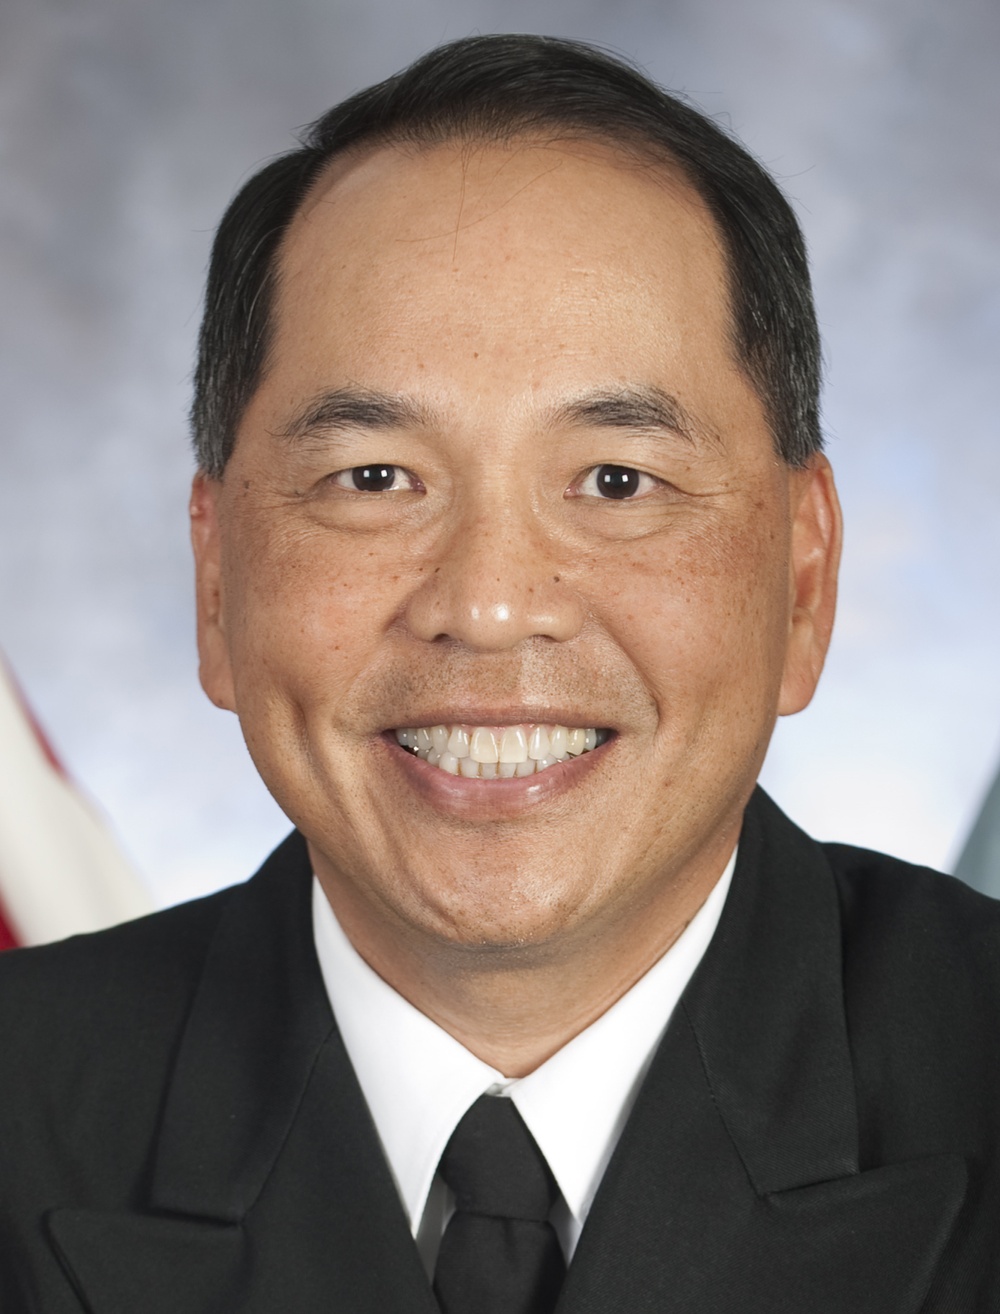 Retired U.S. Navy Rear Admiral Peter A. Gumataotao to be the director of the Daniel K. Inouye Asia-Pacific Center for Security Studies (DKI APCSS)